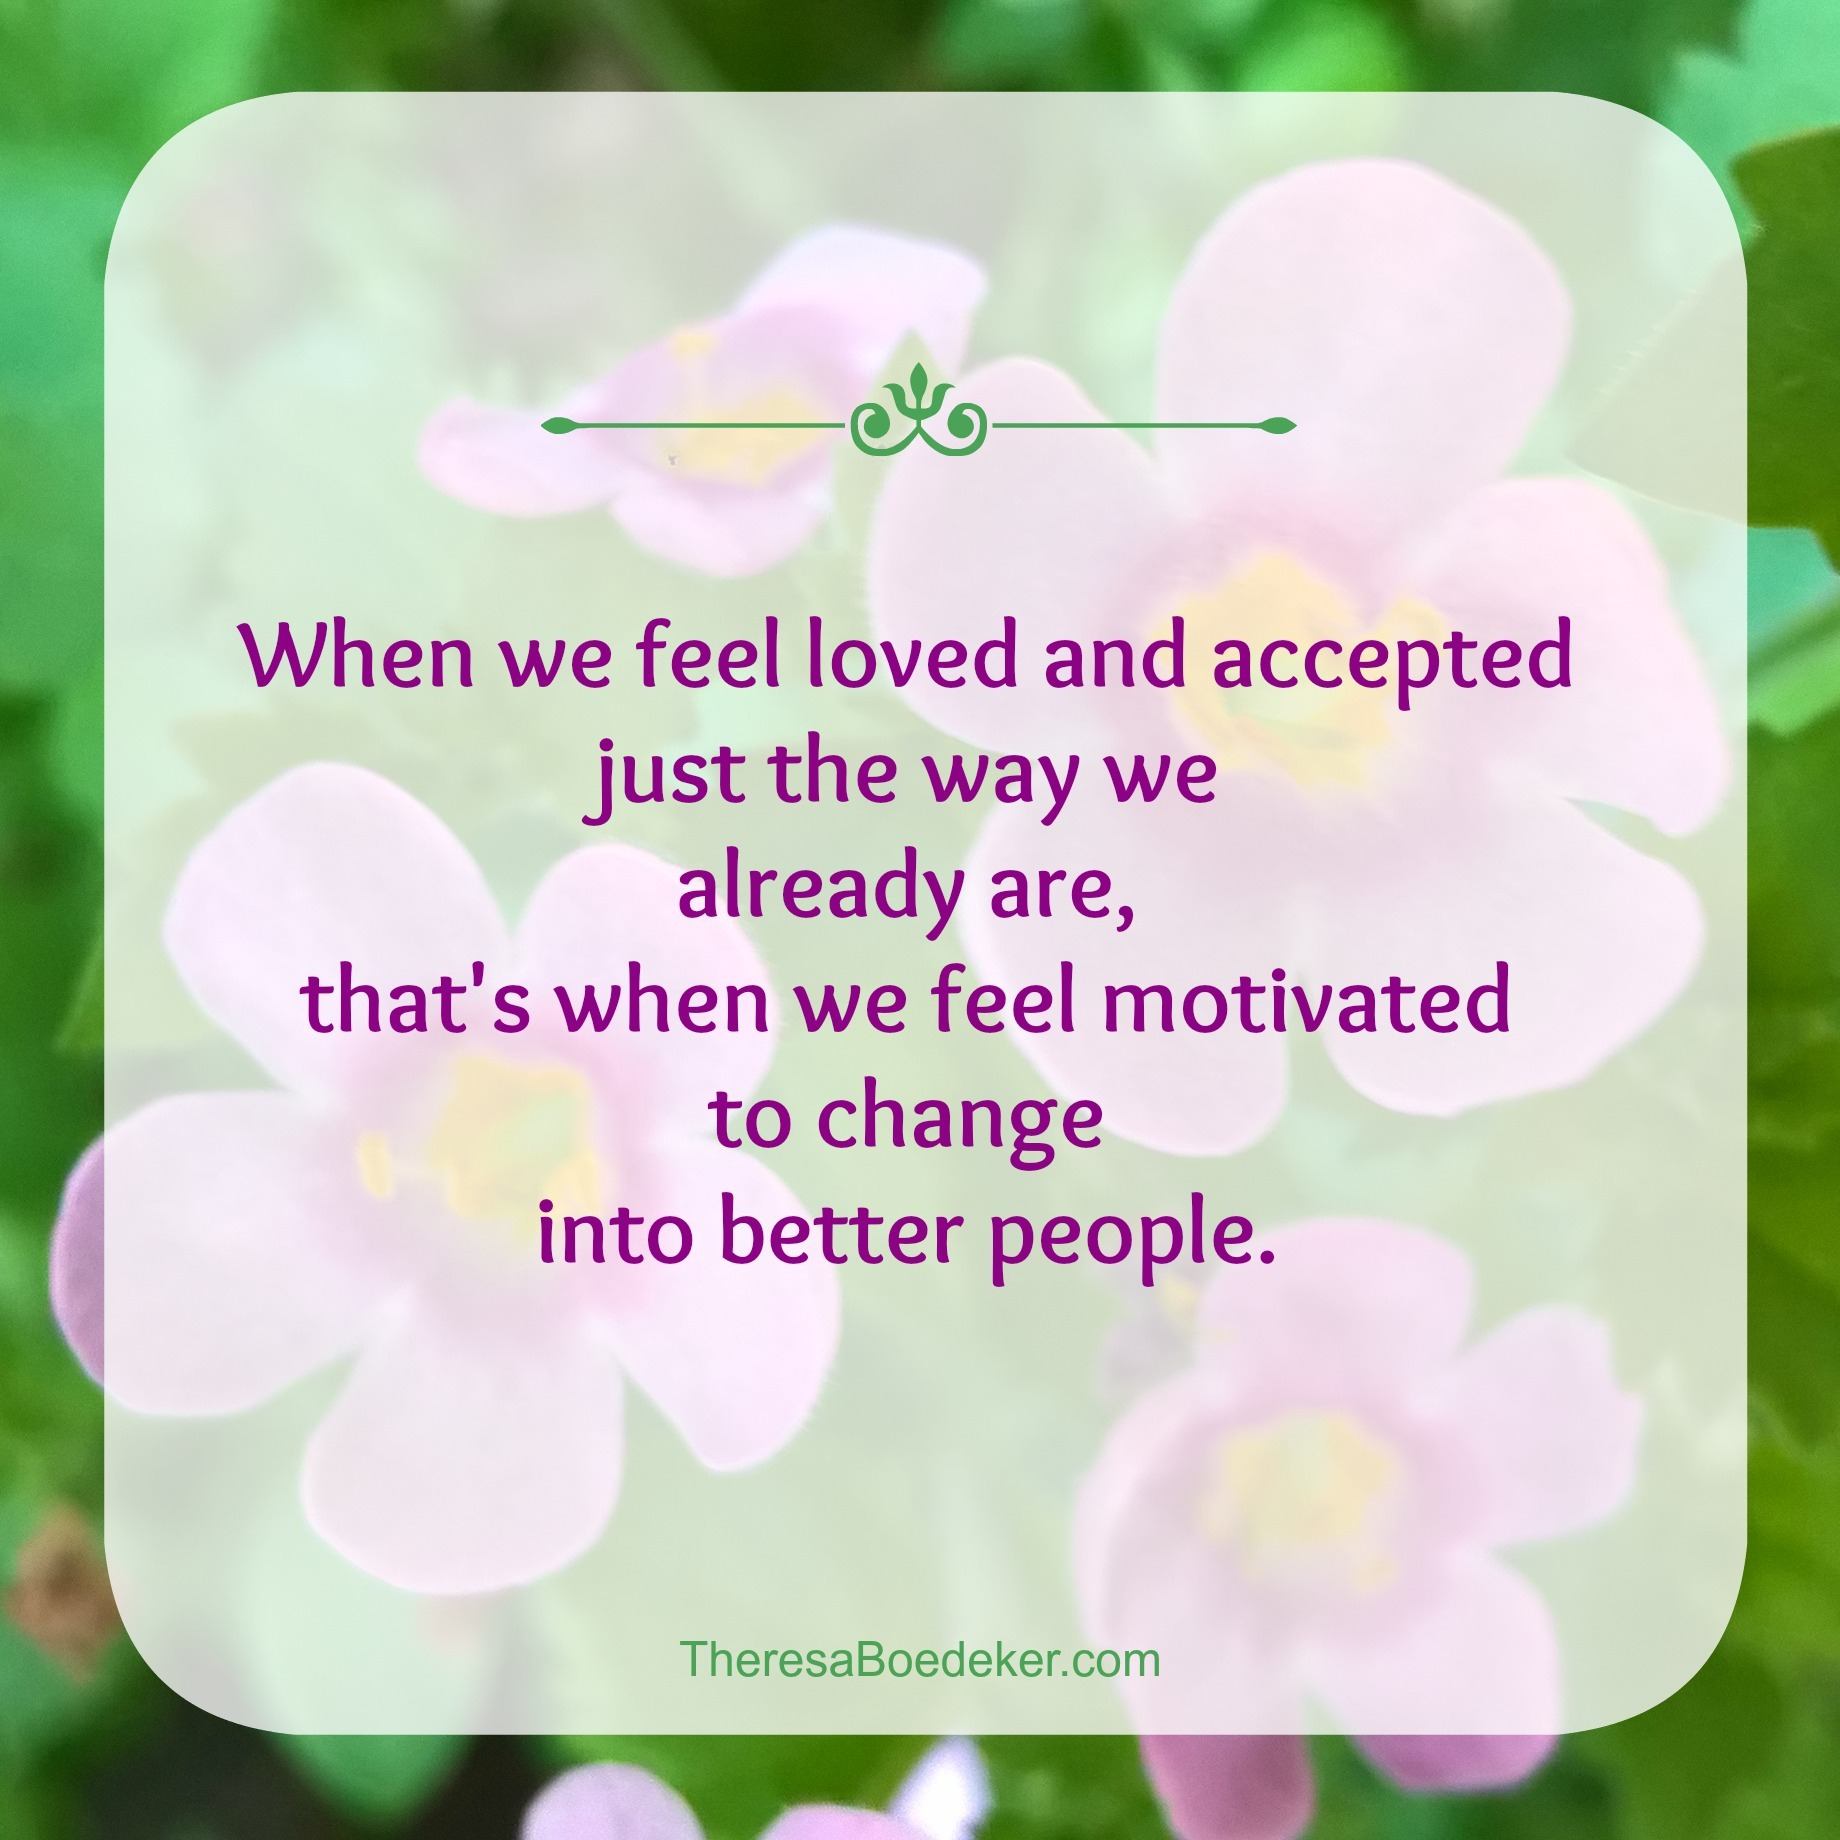 Unconditional love has a secret. When we feel loved and accepted just the way we already are, that's when we get motivated to change into better people.